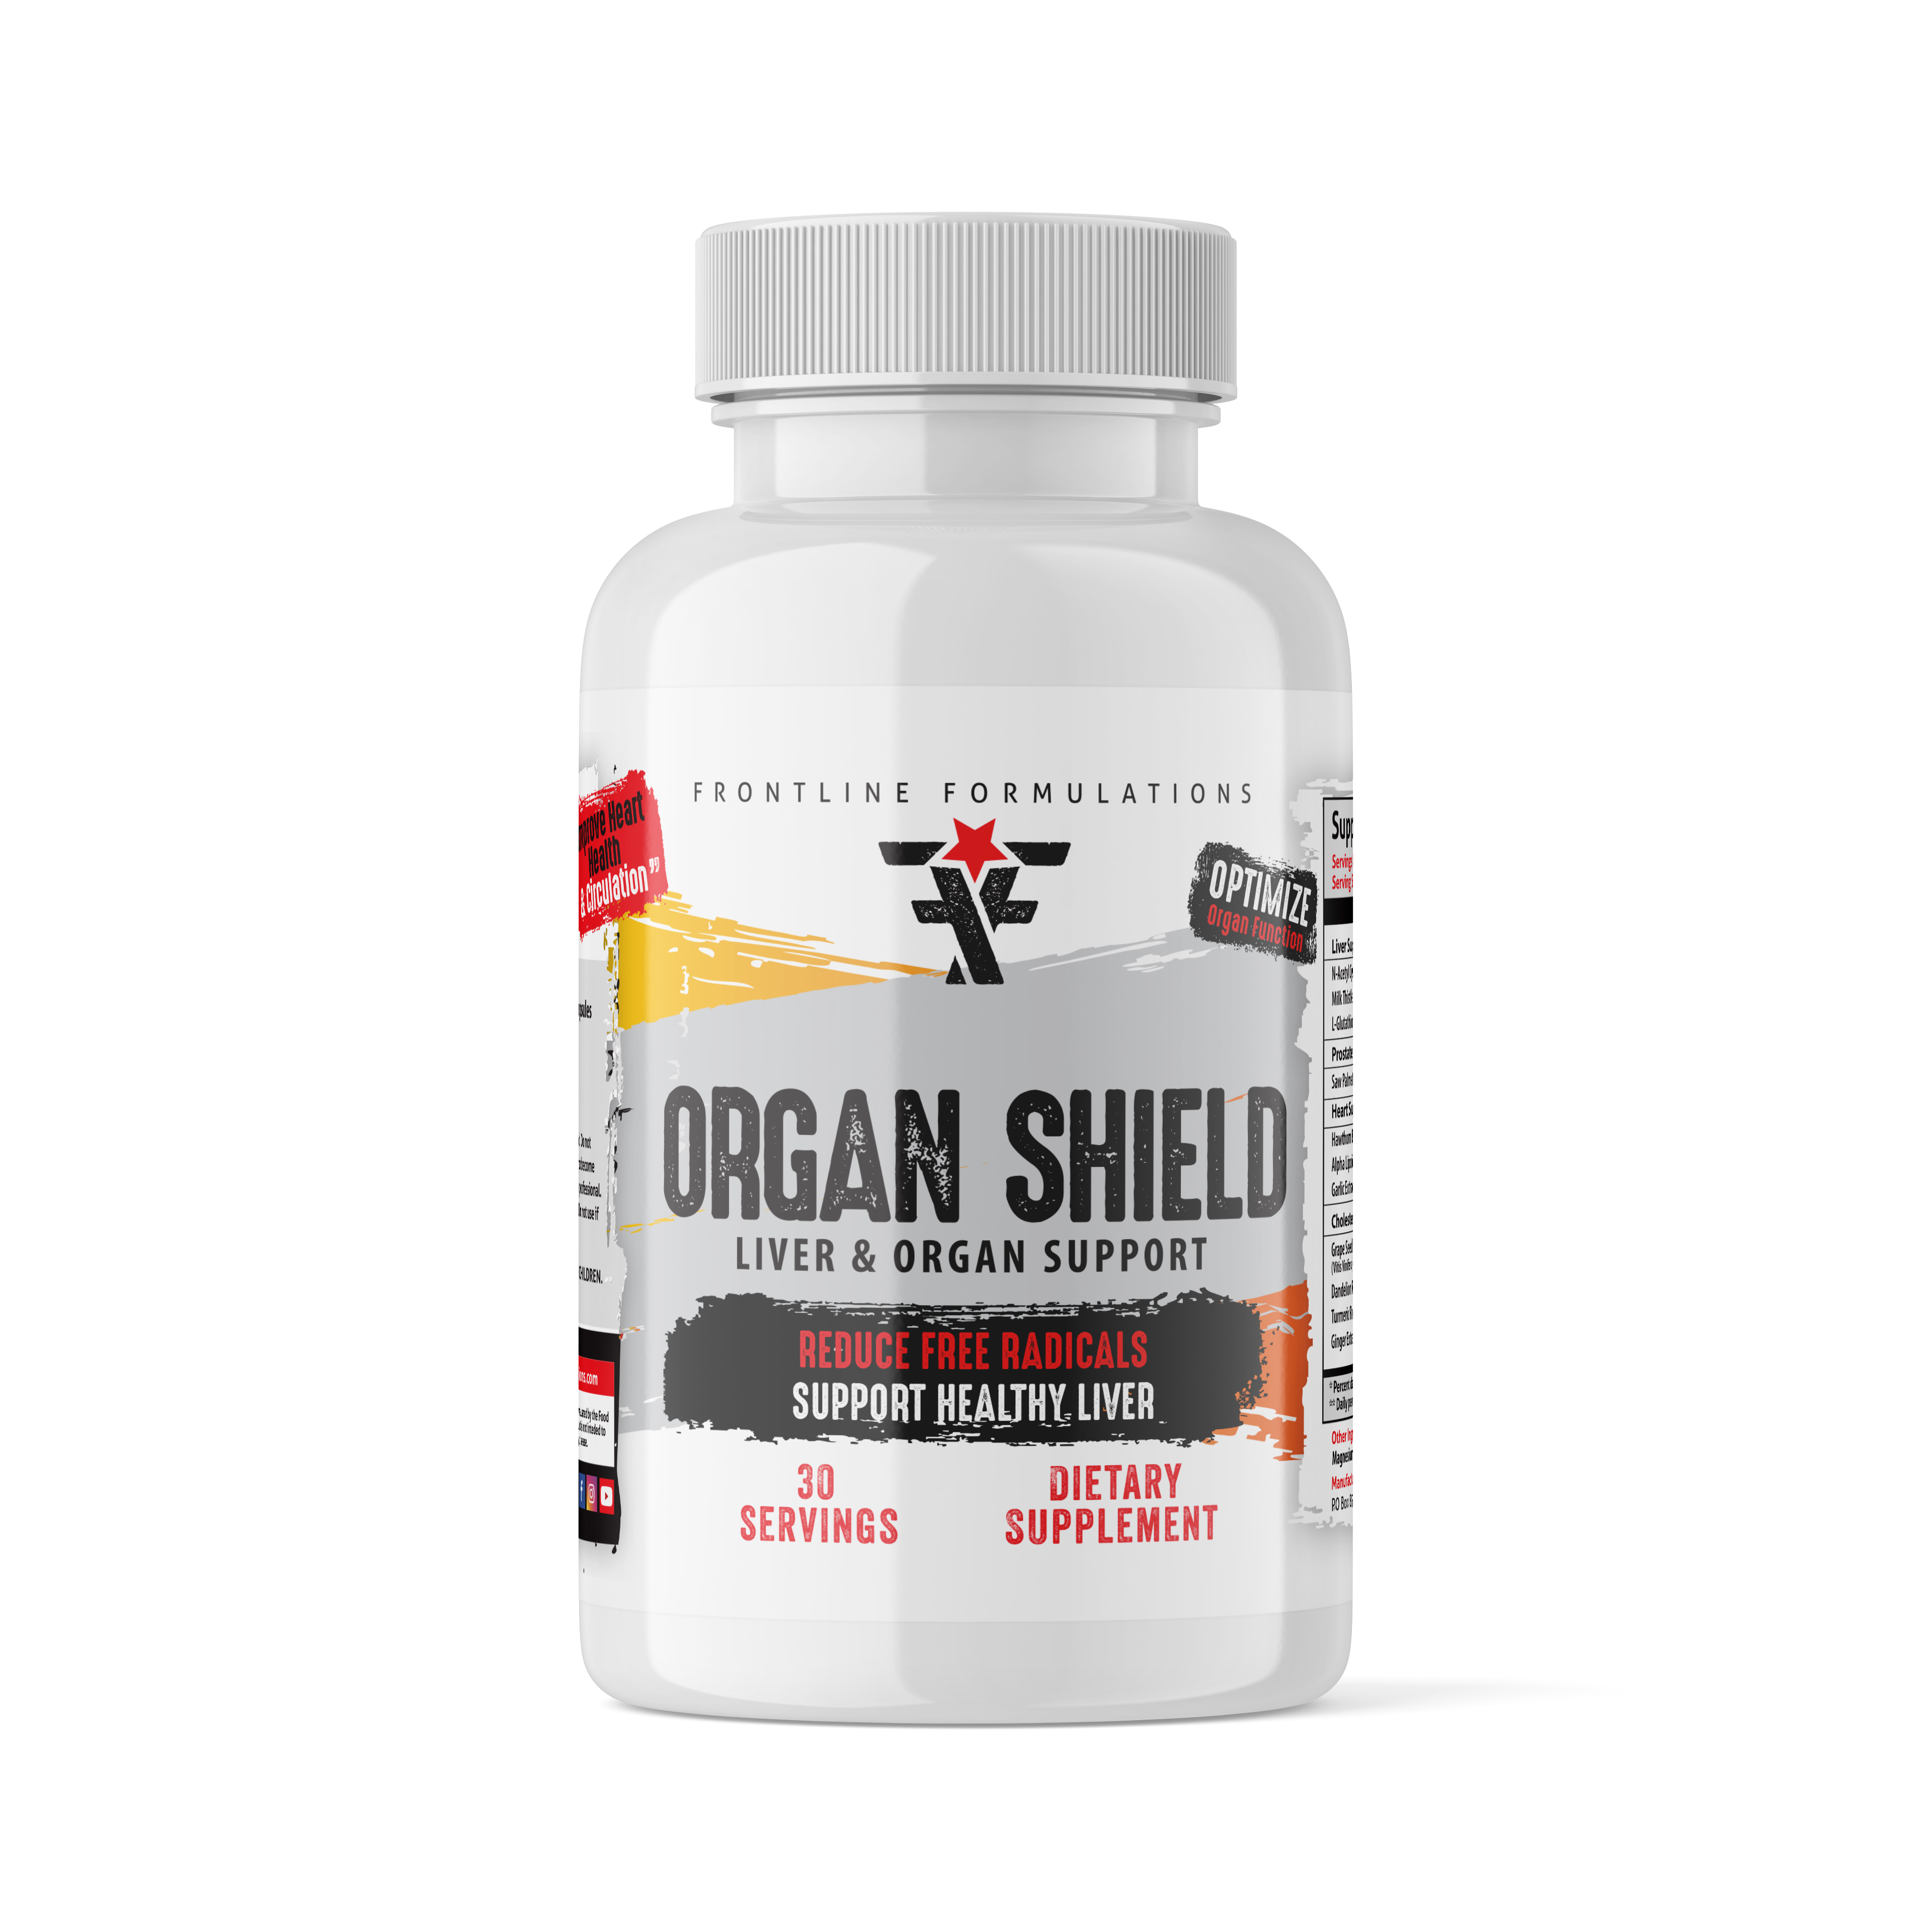 Organ Shield Supports Prostate Health* Promotes Healthy Liver Function* Helps Detoxification to Prevent or Diminish Kidney and Liver Damage* Warning: If under the care of a physician please consult with your doctor before taking. This product is meant for